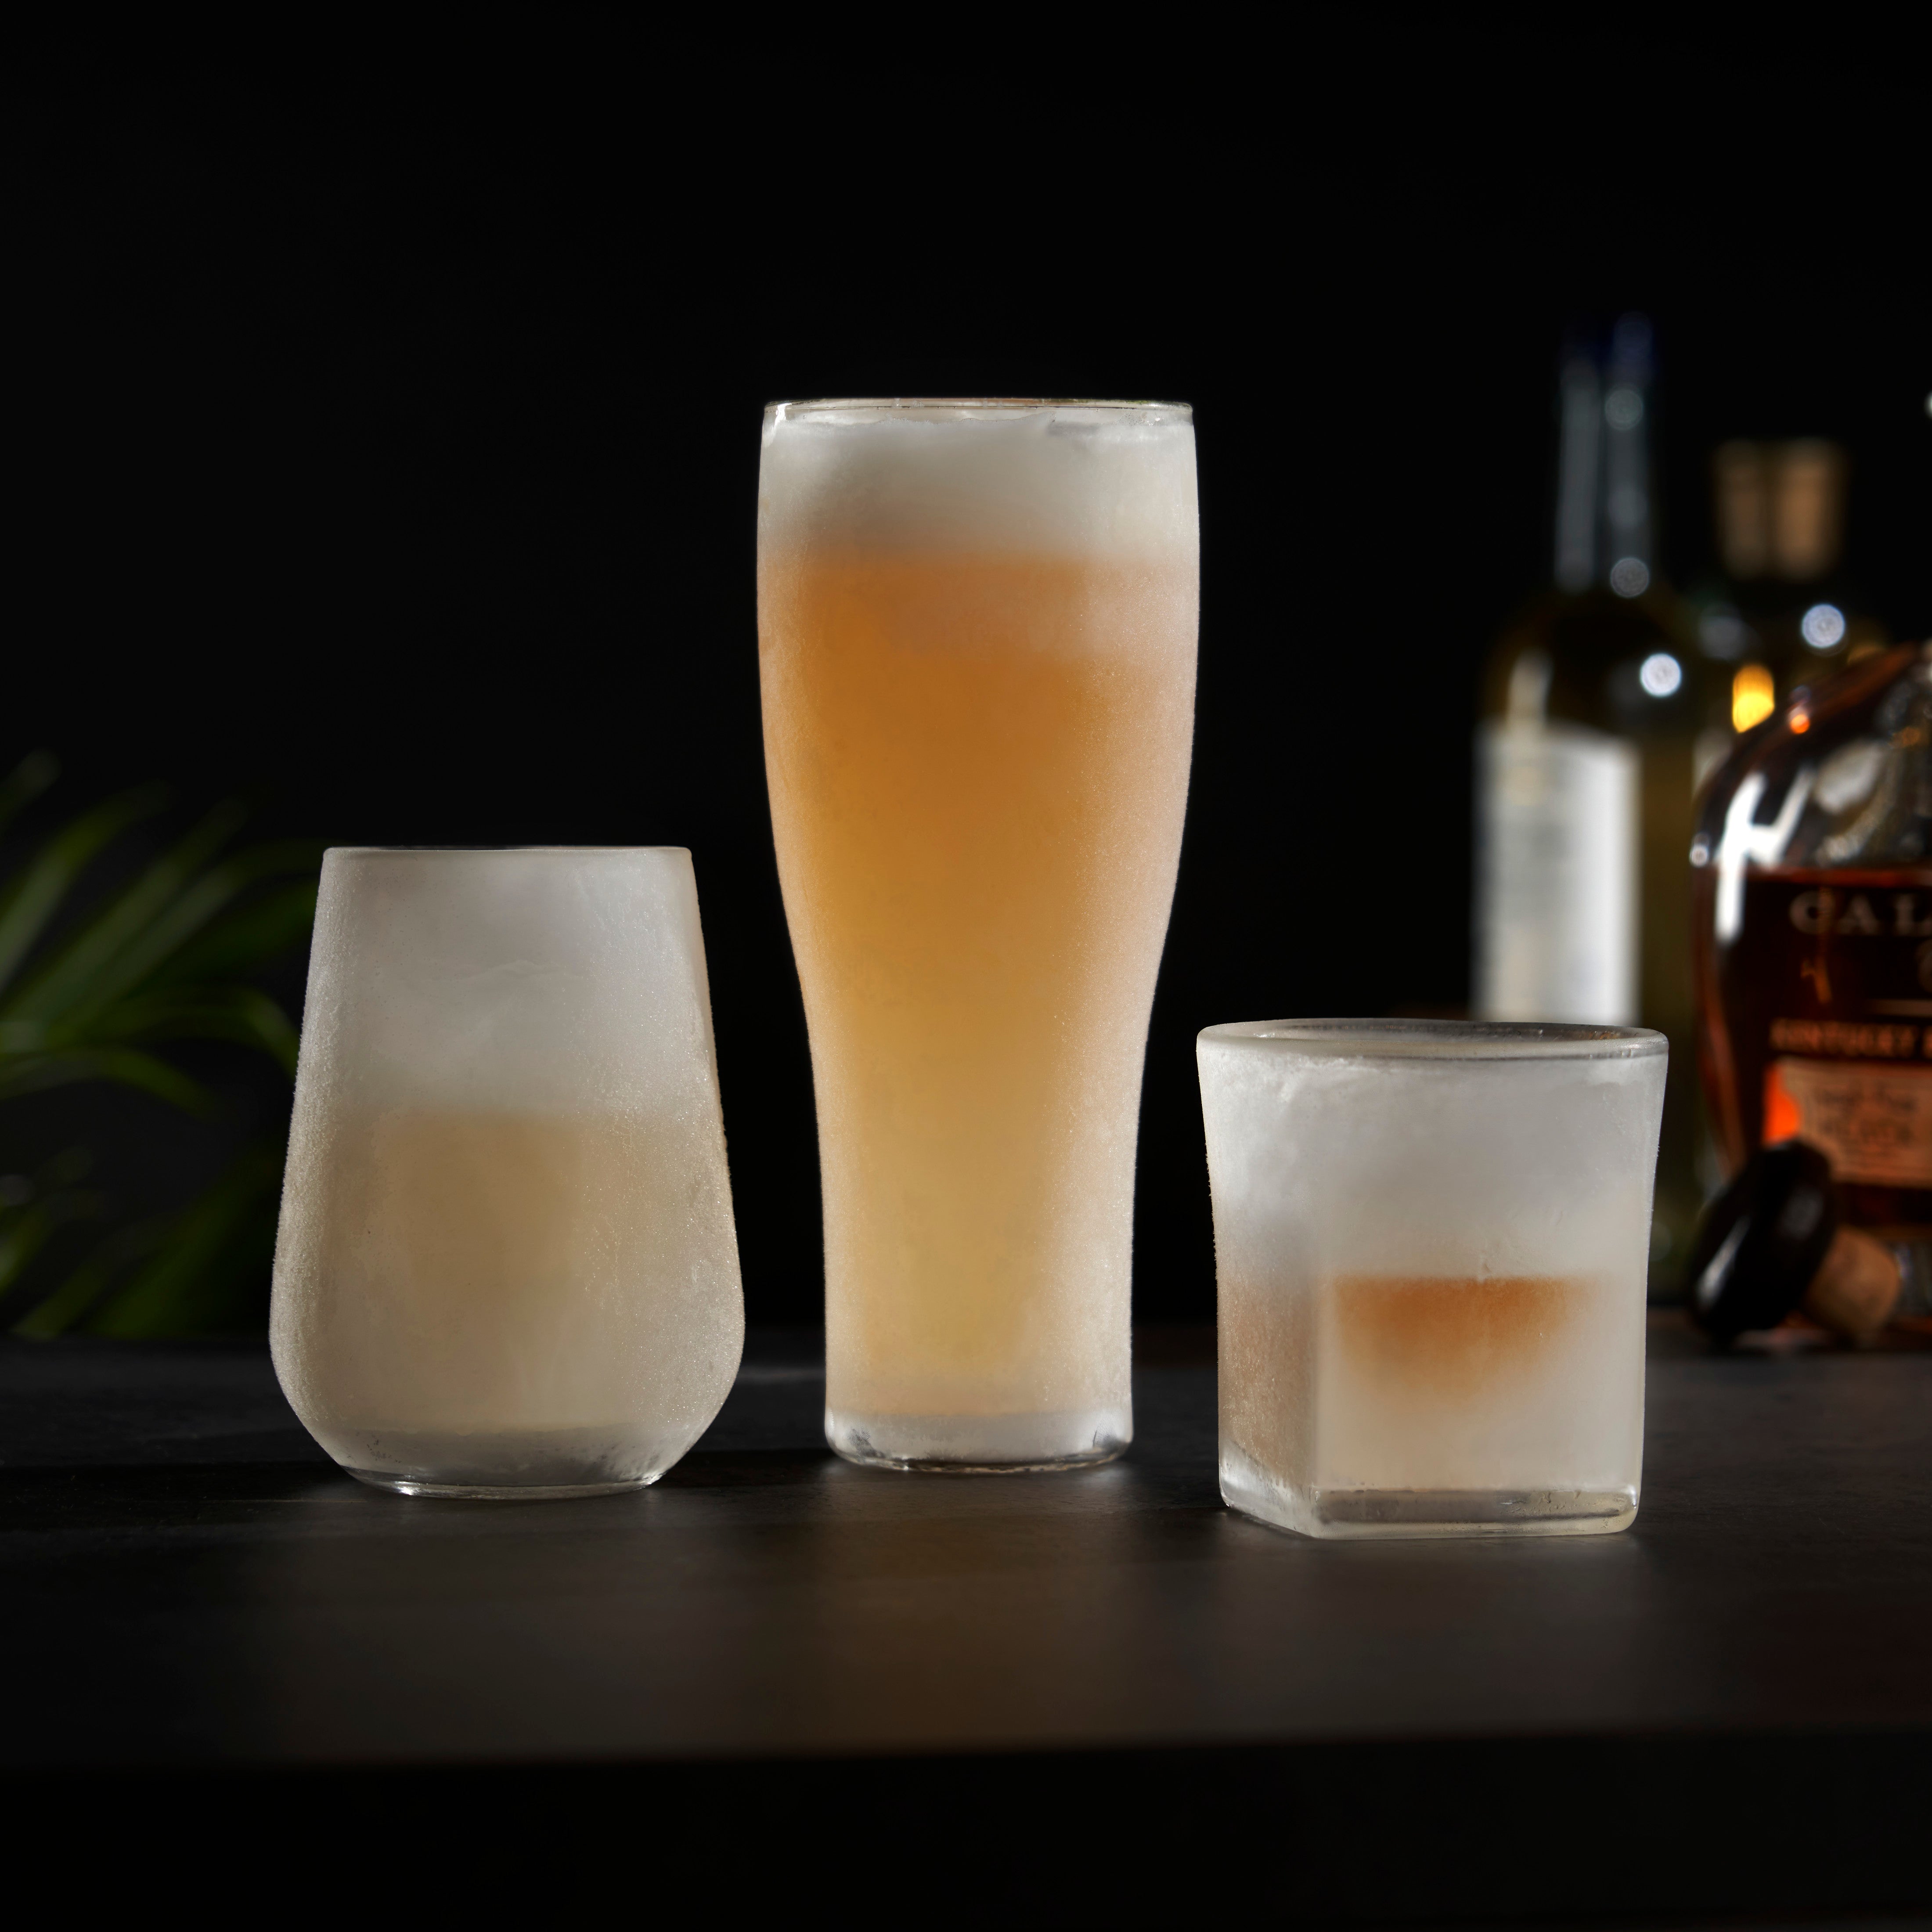 Large Transparent Glass Cup for Ice Beer, Cocktail Whisky Drinking